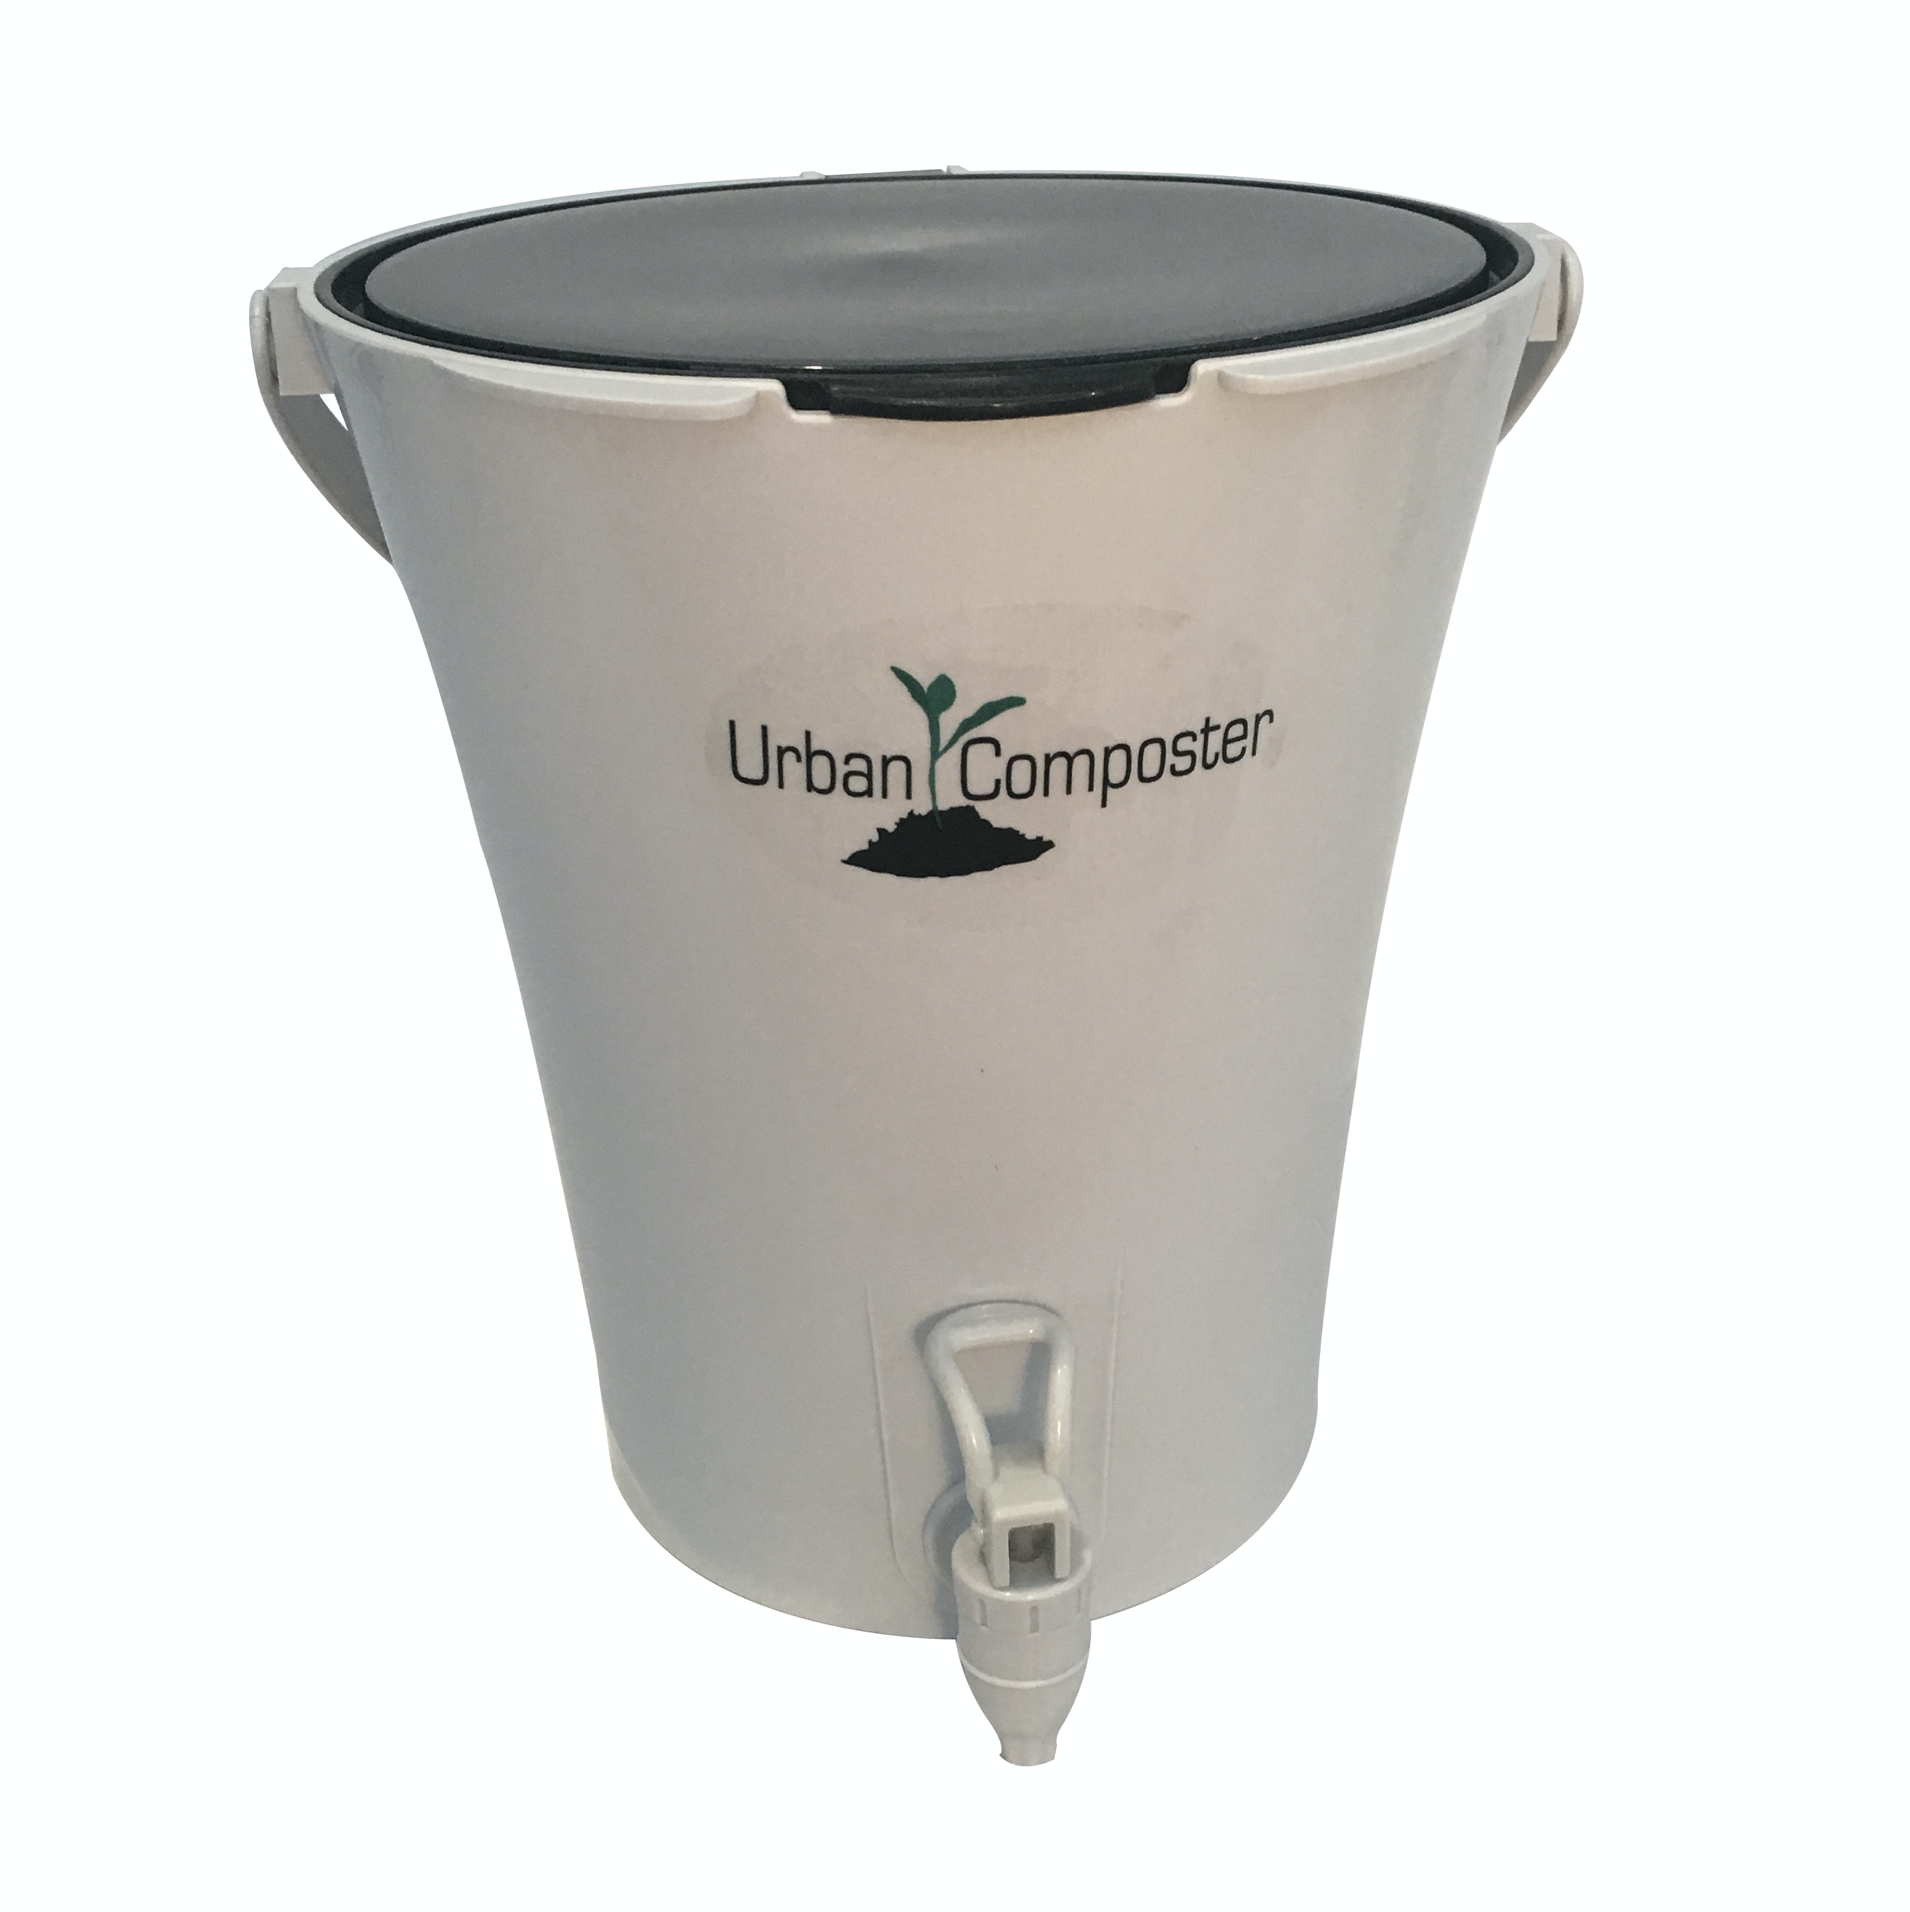 New Urban Composter City, indoor Bokashi bin, perfect for smaller kitchens. £34.95. urbancompster.co